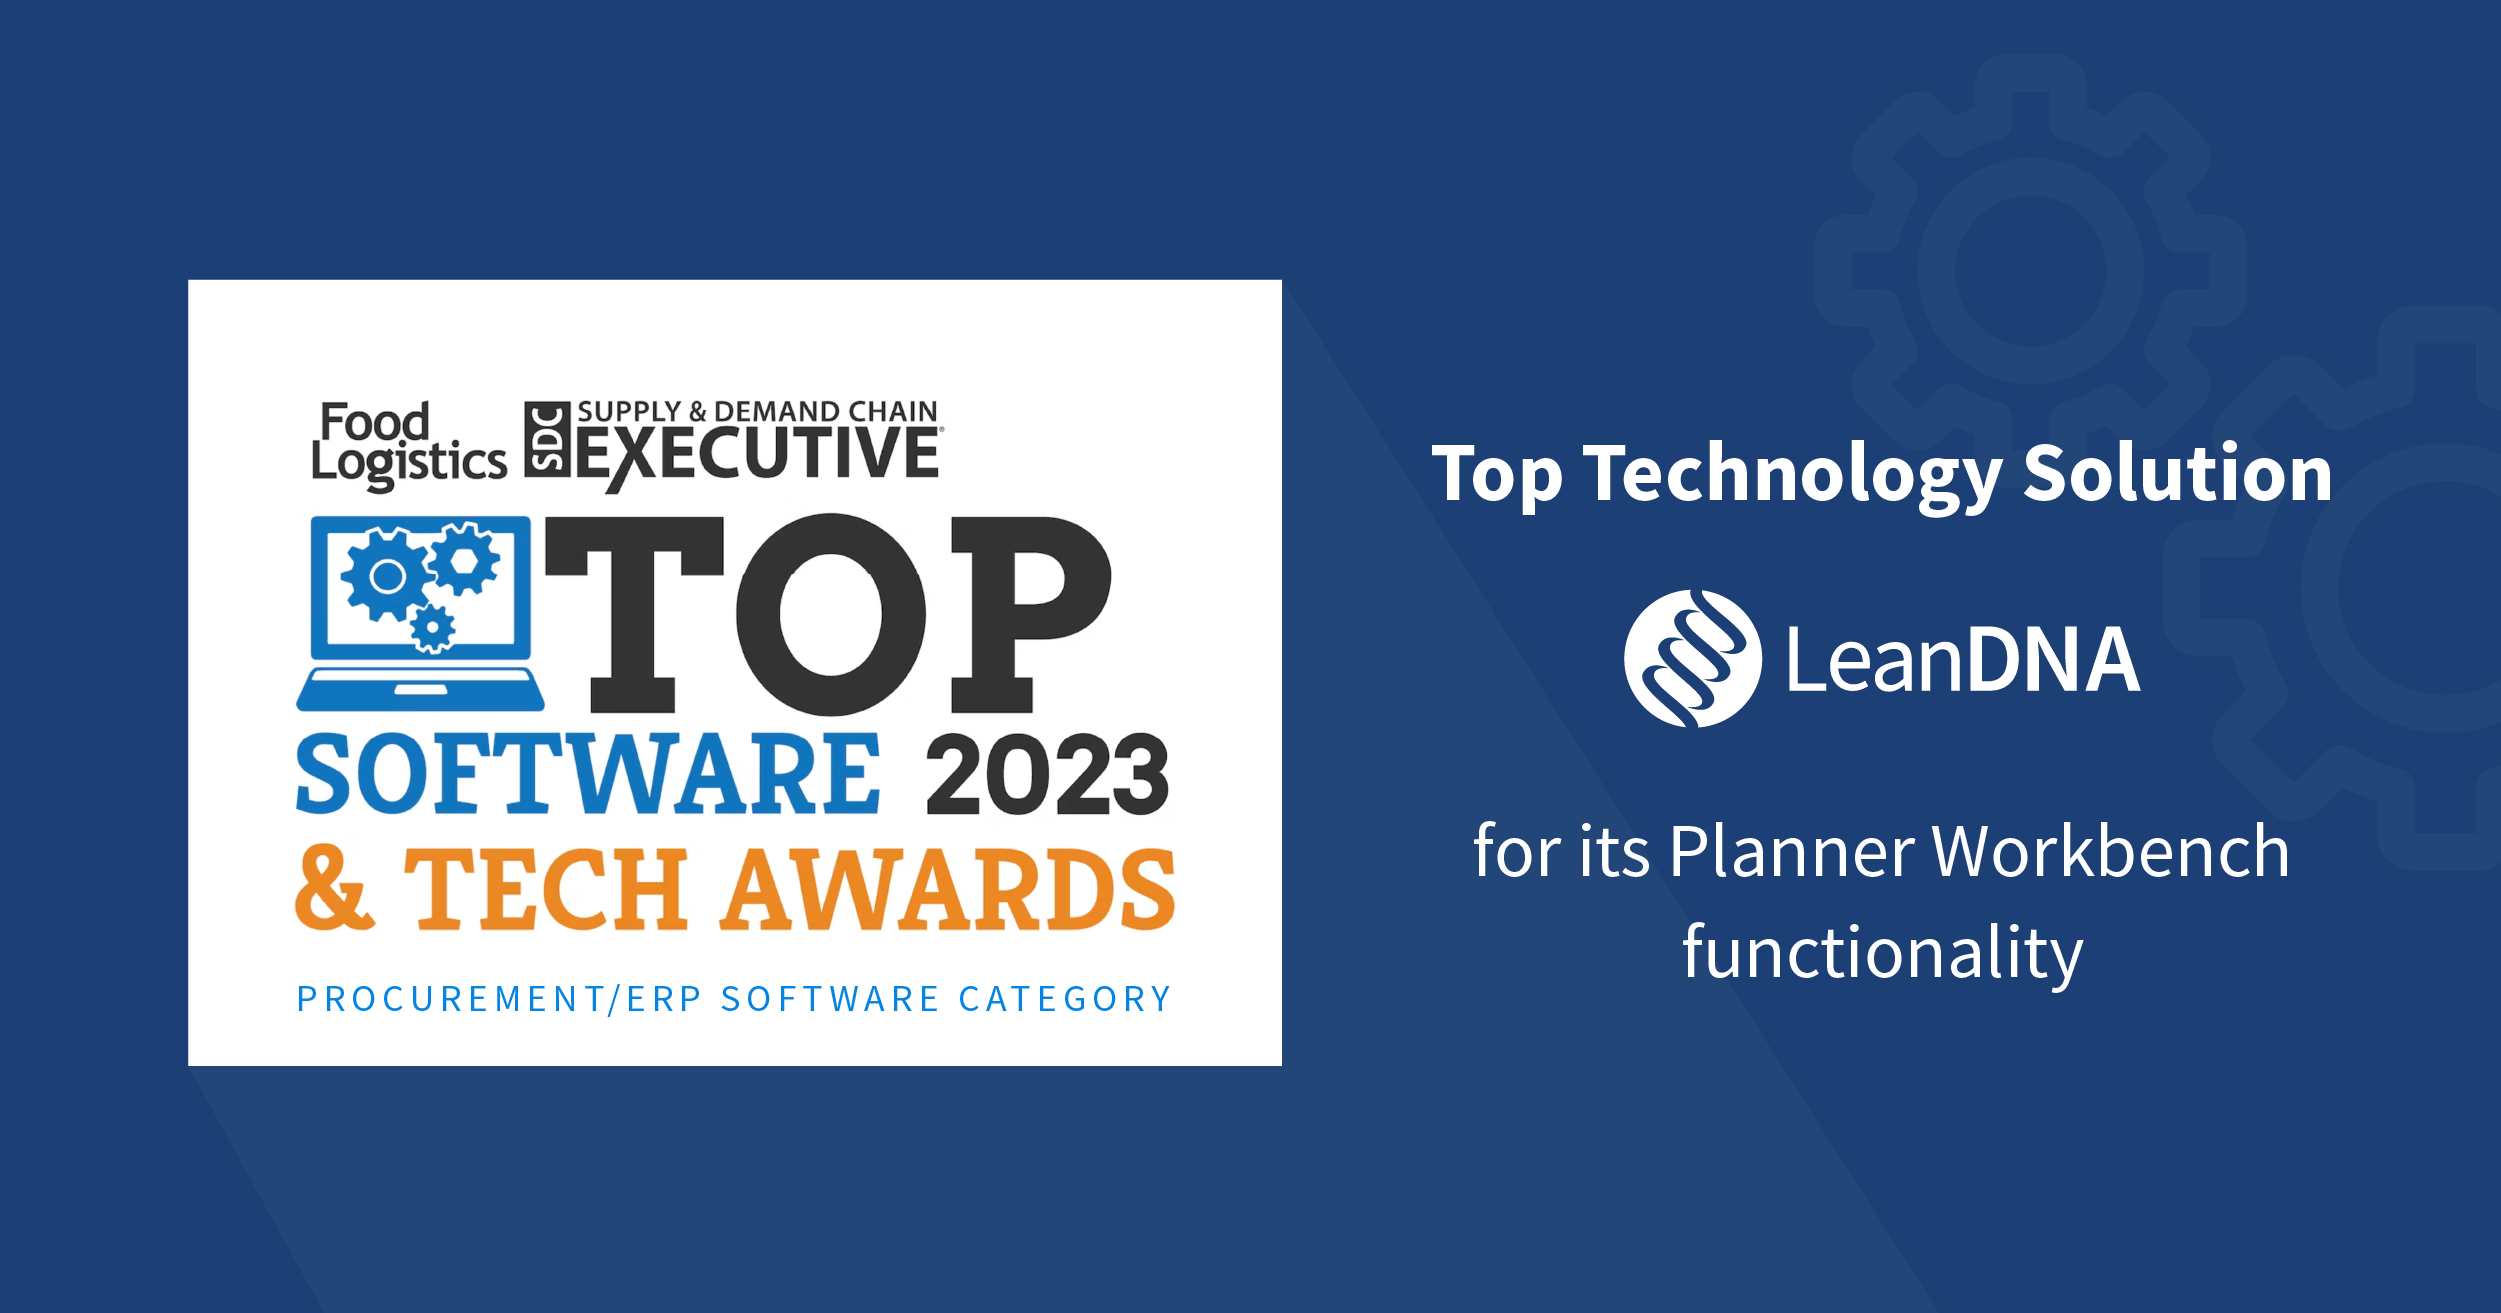 Top Software & Tech Awards 2023 LeanDNA for Planner Workbench Functionality